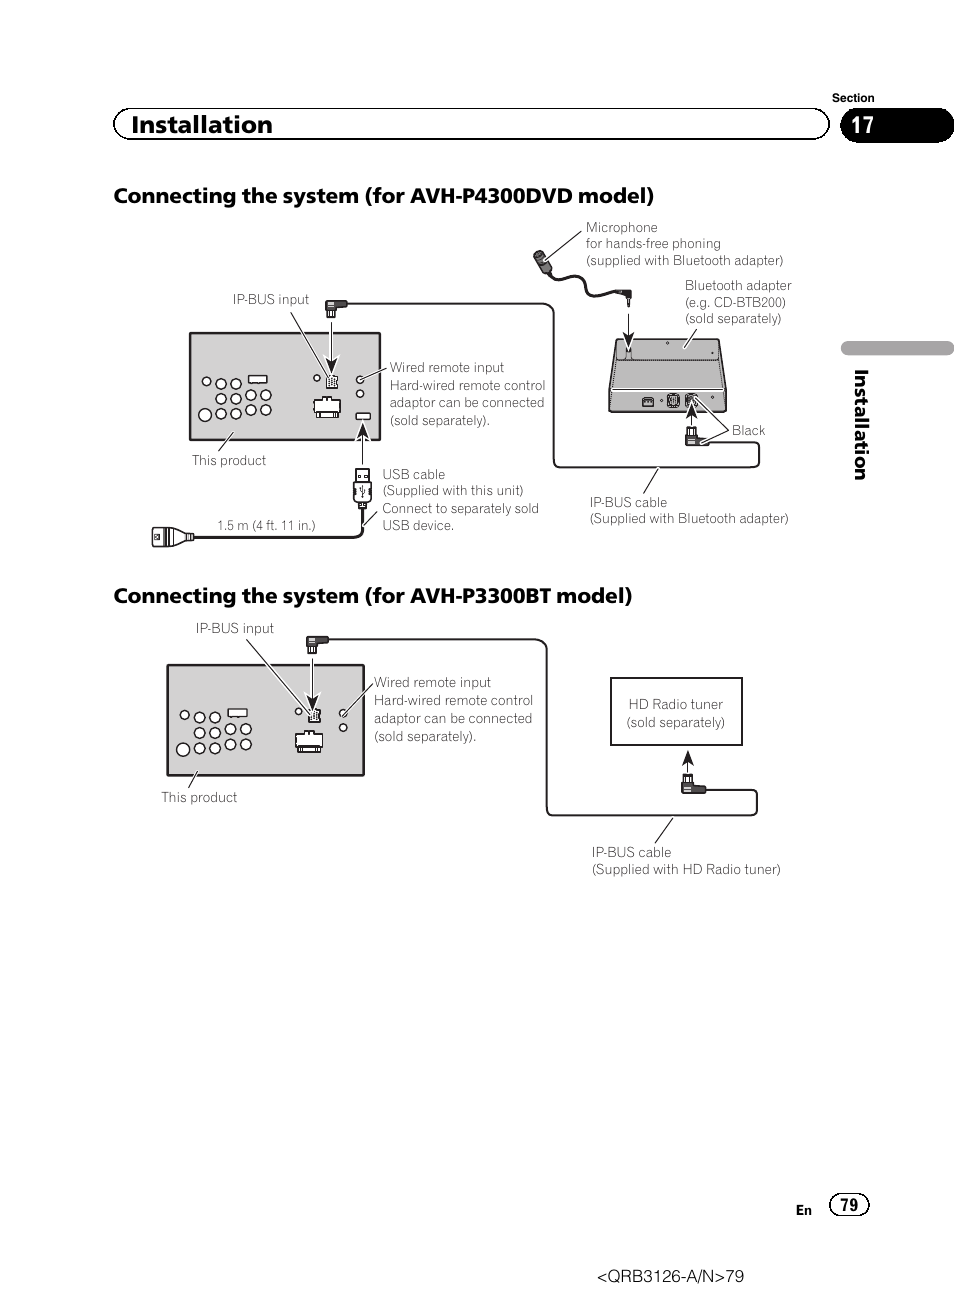 Installation, Connecting the system (for avh-p4300dvd model